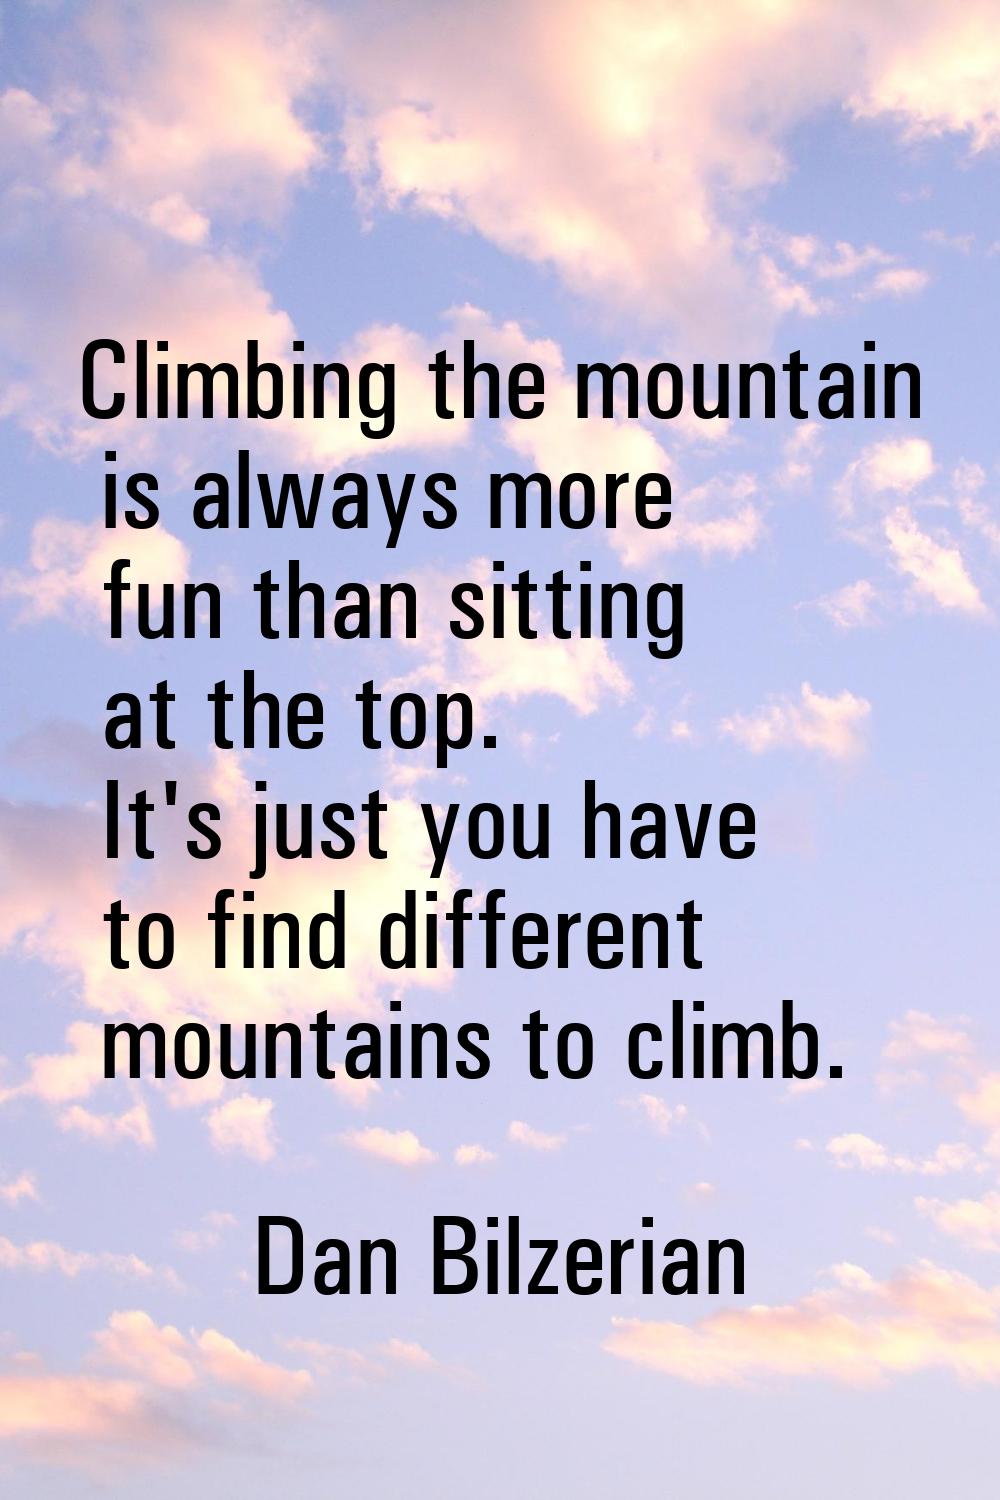 Climbing the mountain is always more fun than sitting at the top. It's just you have to find differ